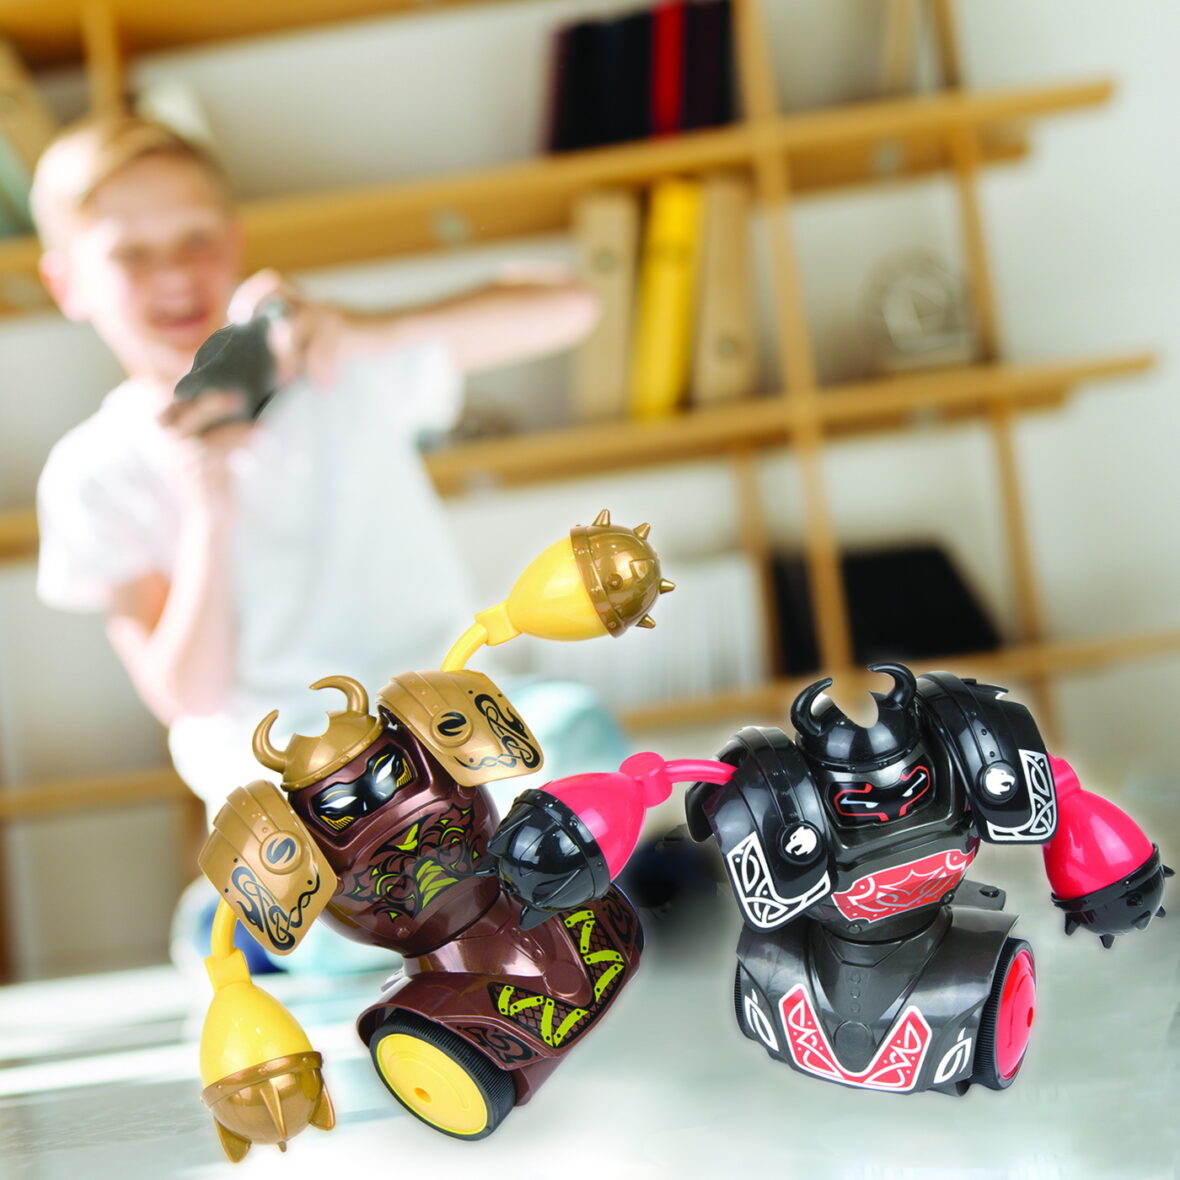 Little boy testing his robotic vehicle toy